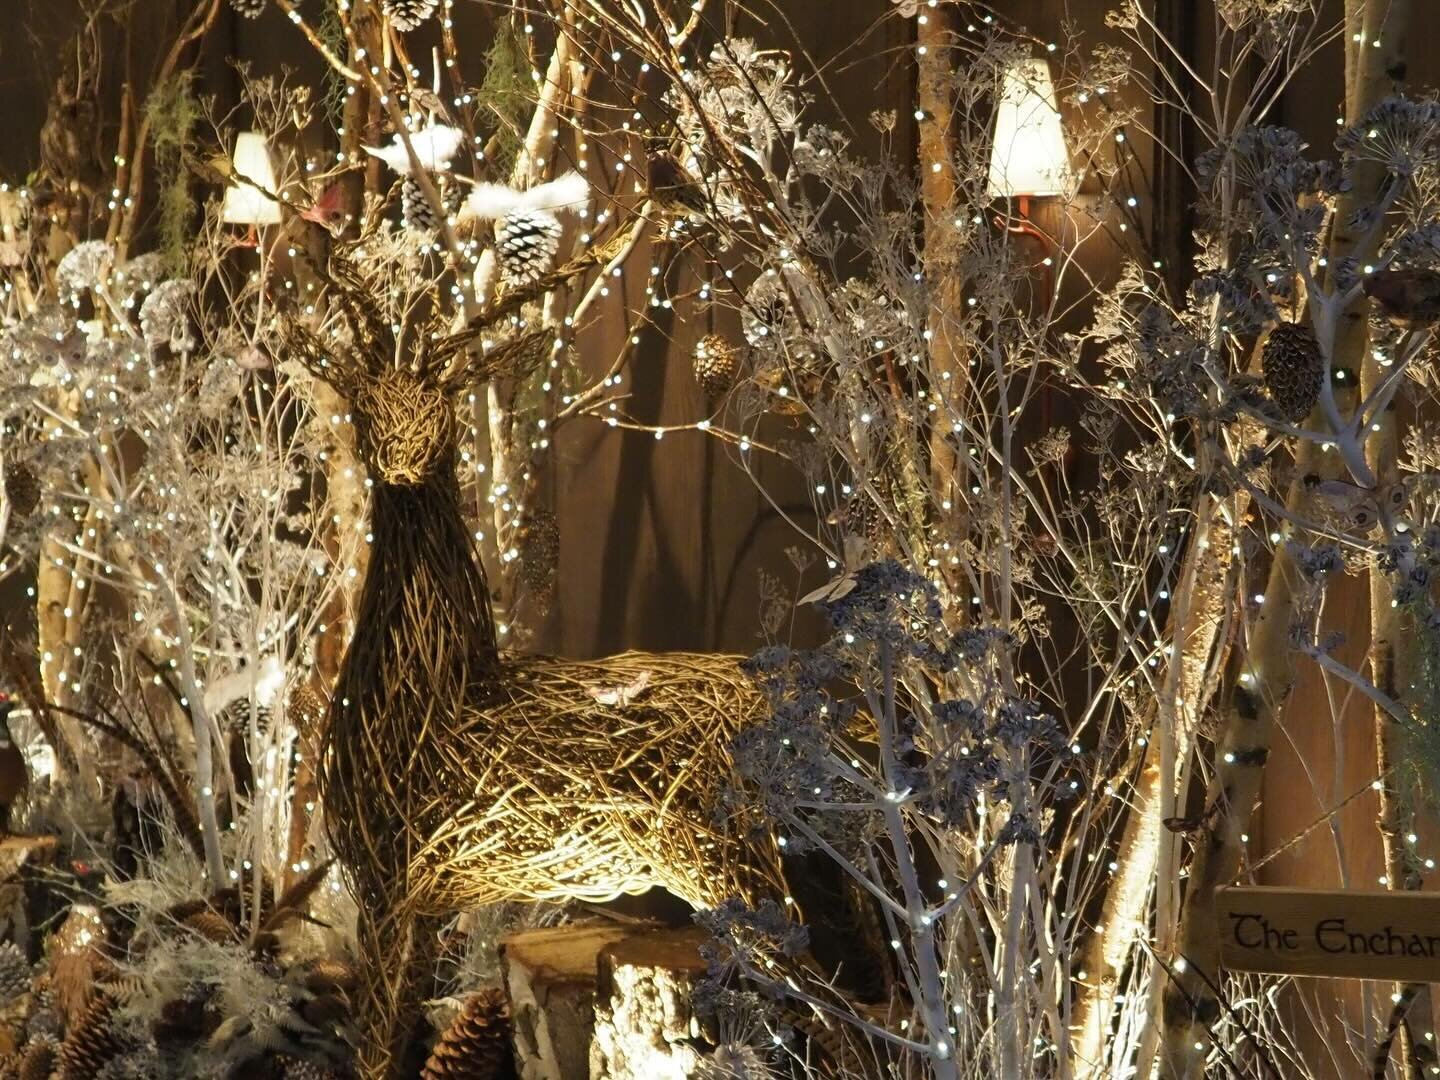 Enchanted woodland scene @onealdwychhotel @mark.at.one . Lots of beautiful details if you look closely 🦋🕊️